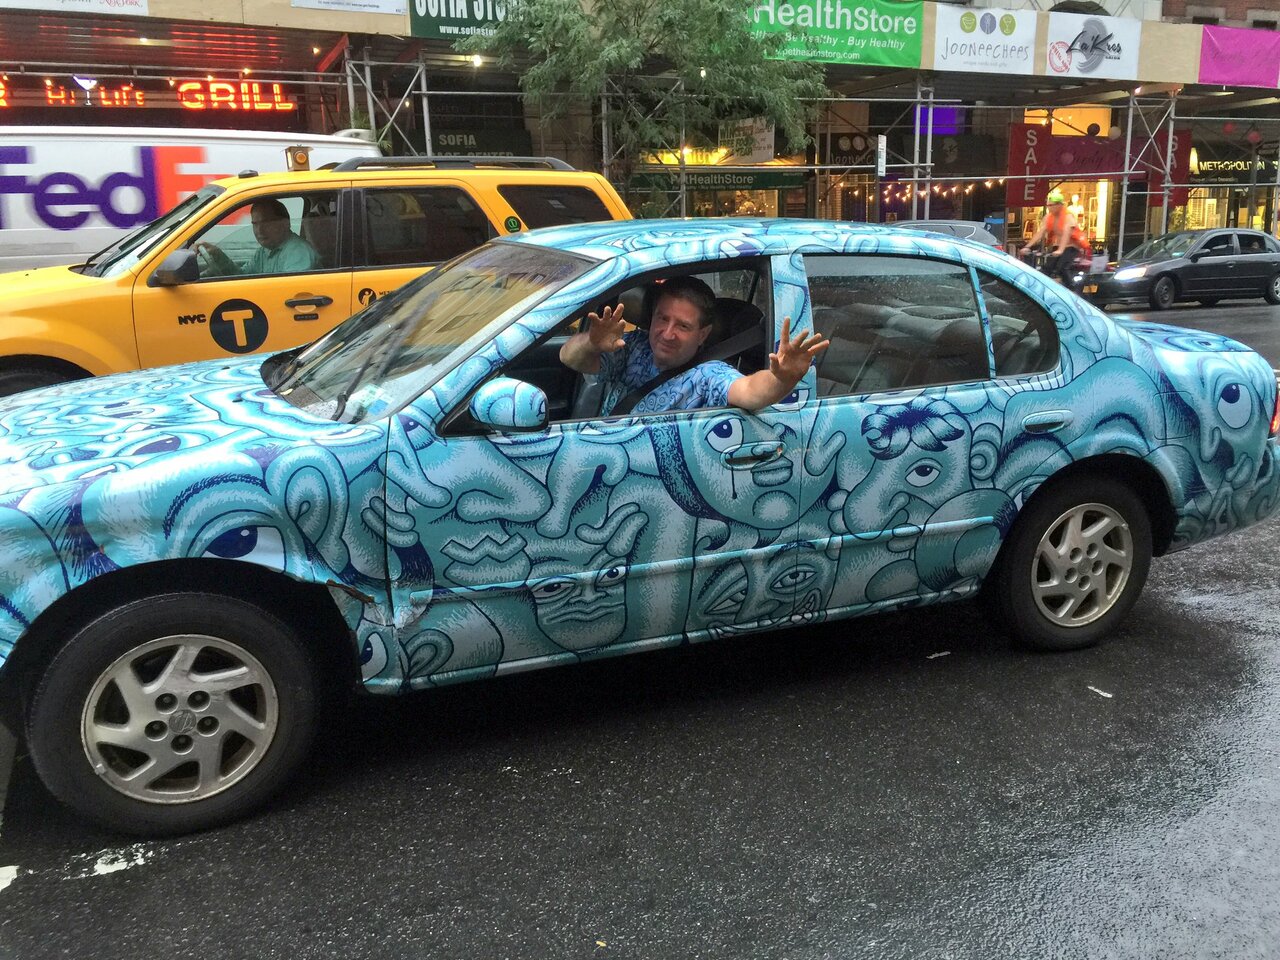 This guy!!Gotta love that @andygolub tshirt, car & mural #painting all match! #NewYork #streetart (25thSt&10thAve) https://t.co/pXYhJkXO3F